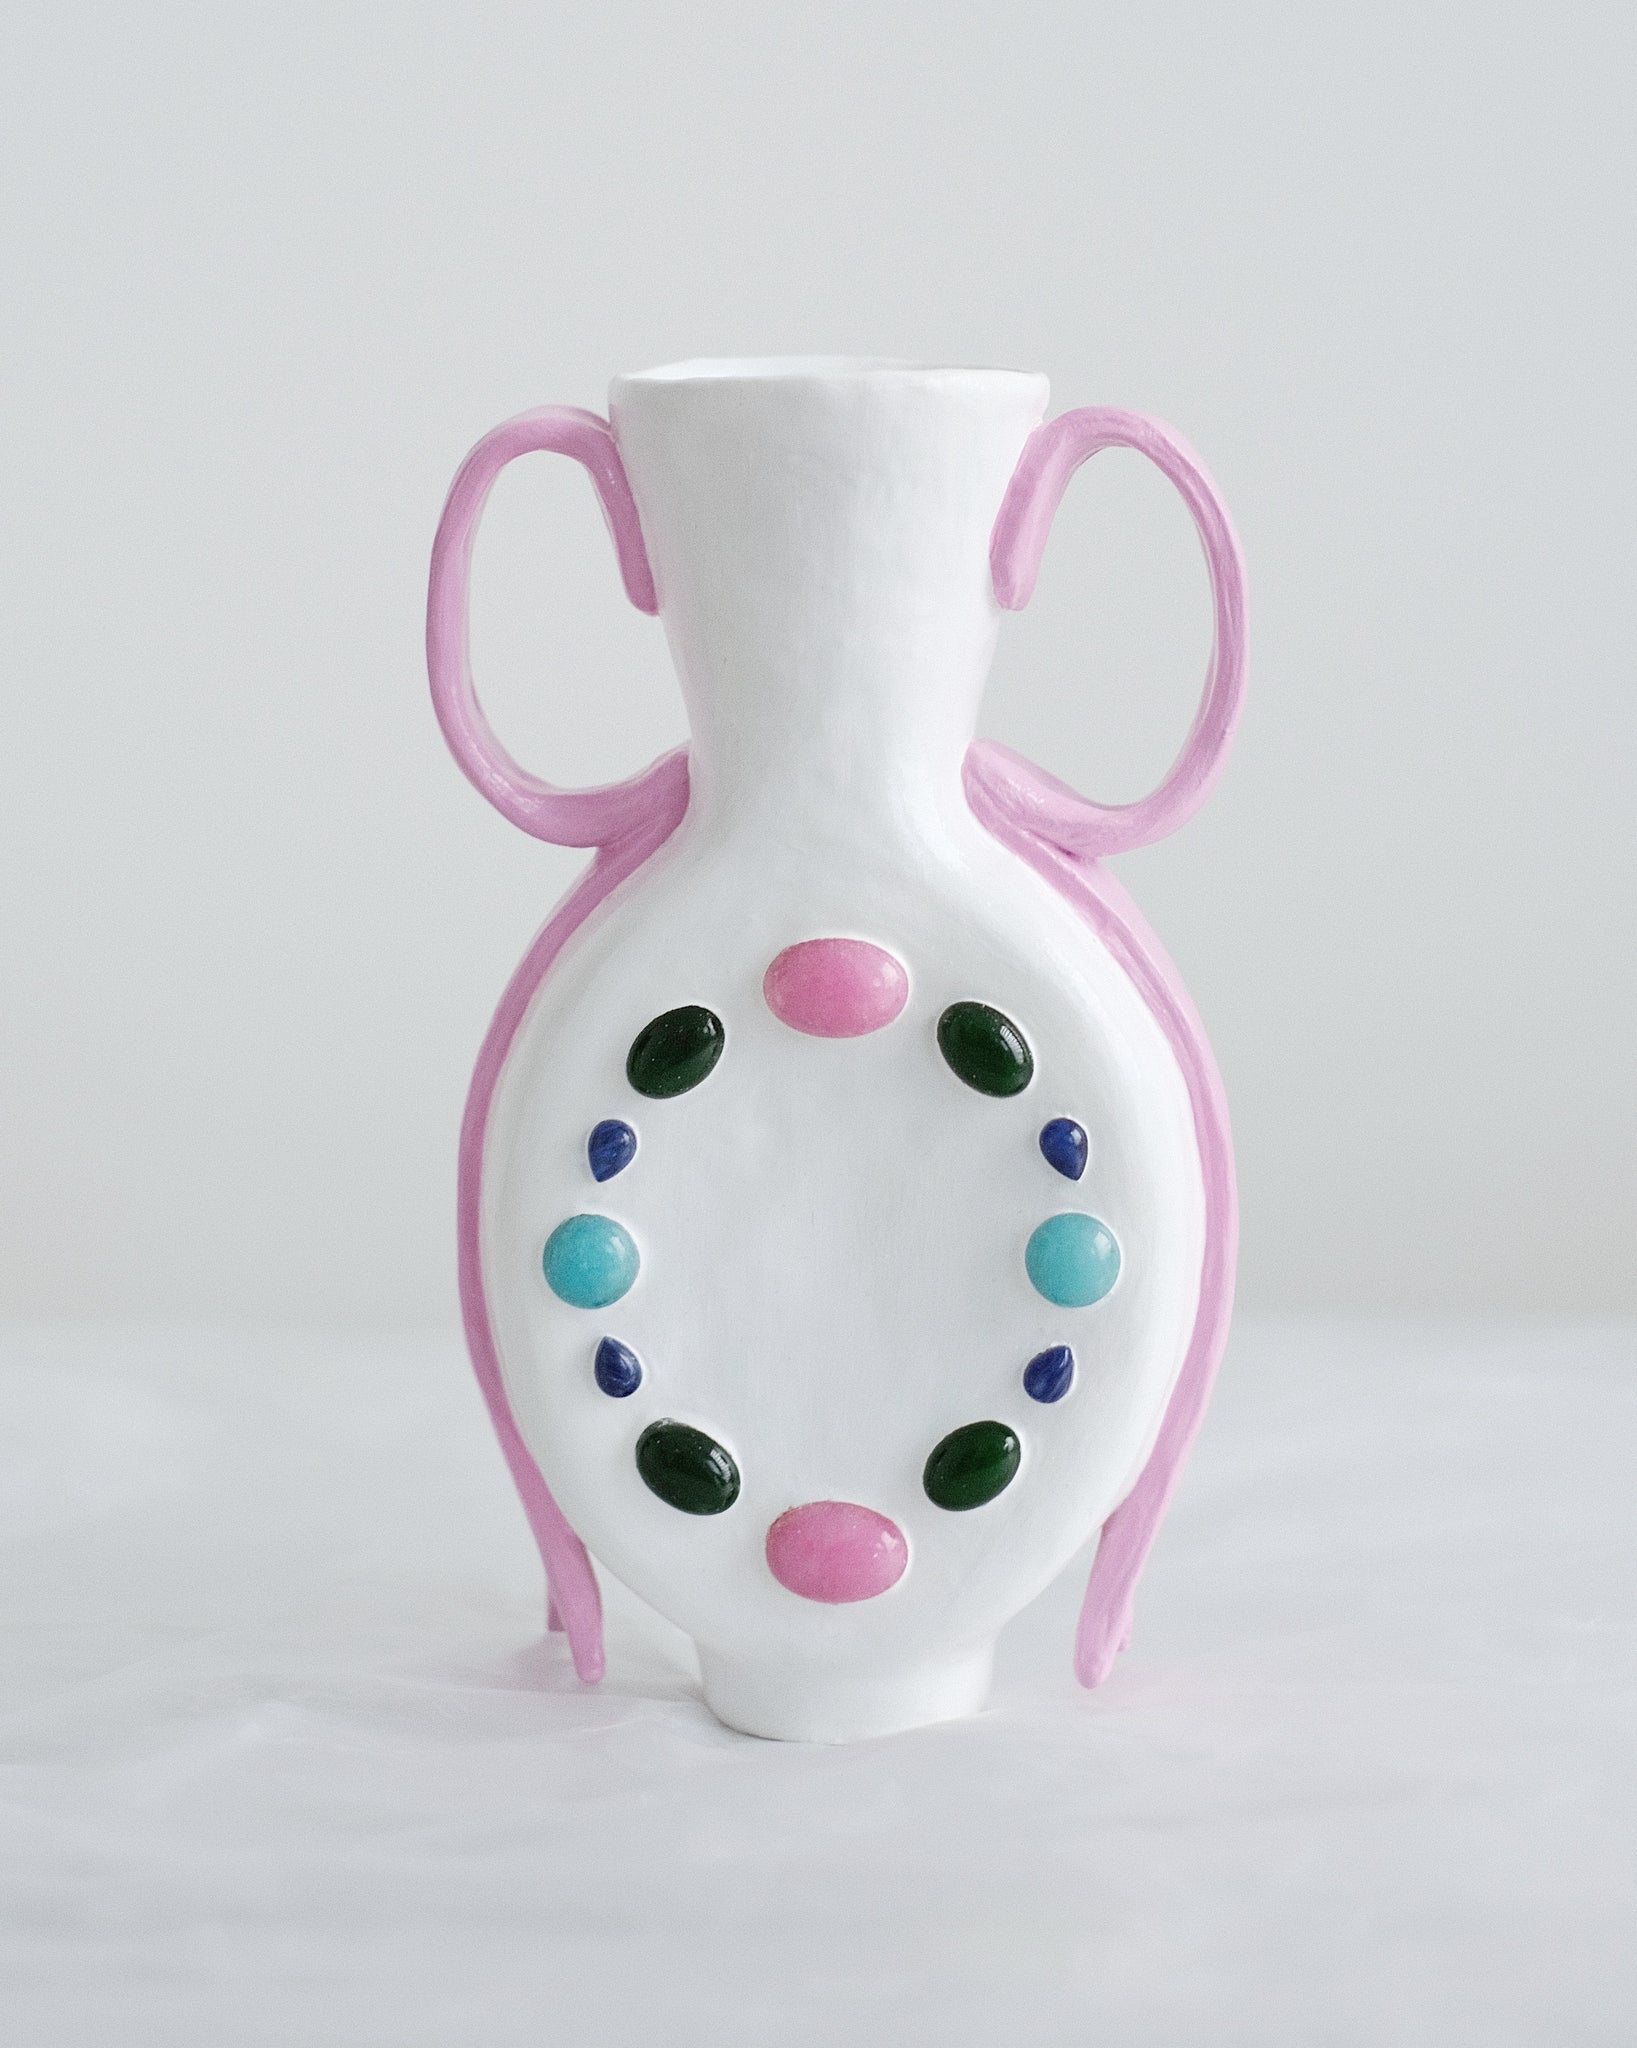 All Kinds Gemstone Vase with Gem Colored Cabochons and Pink Ribbon Handles